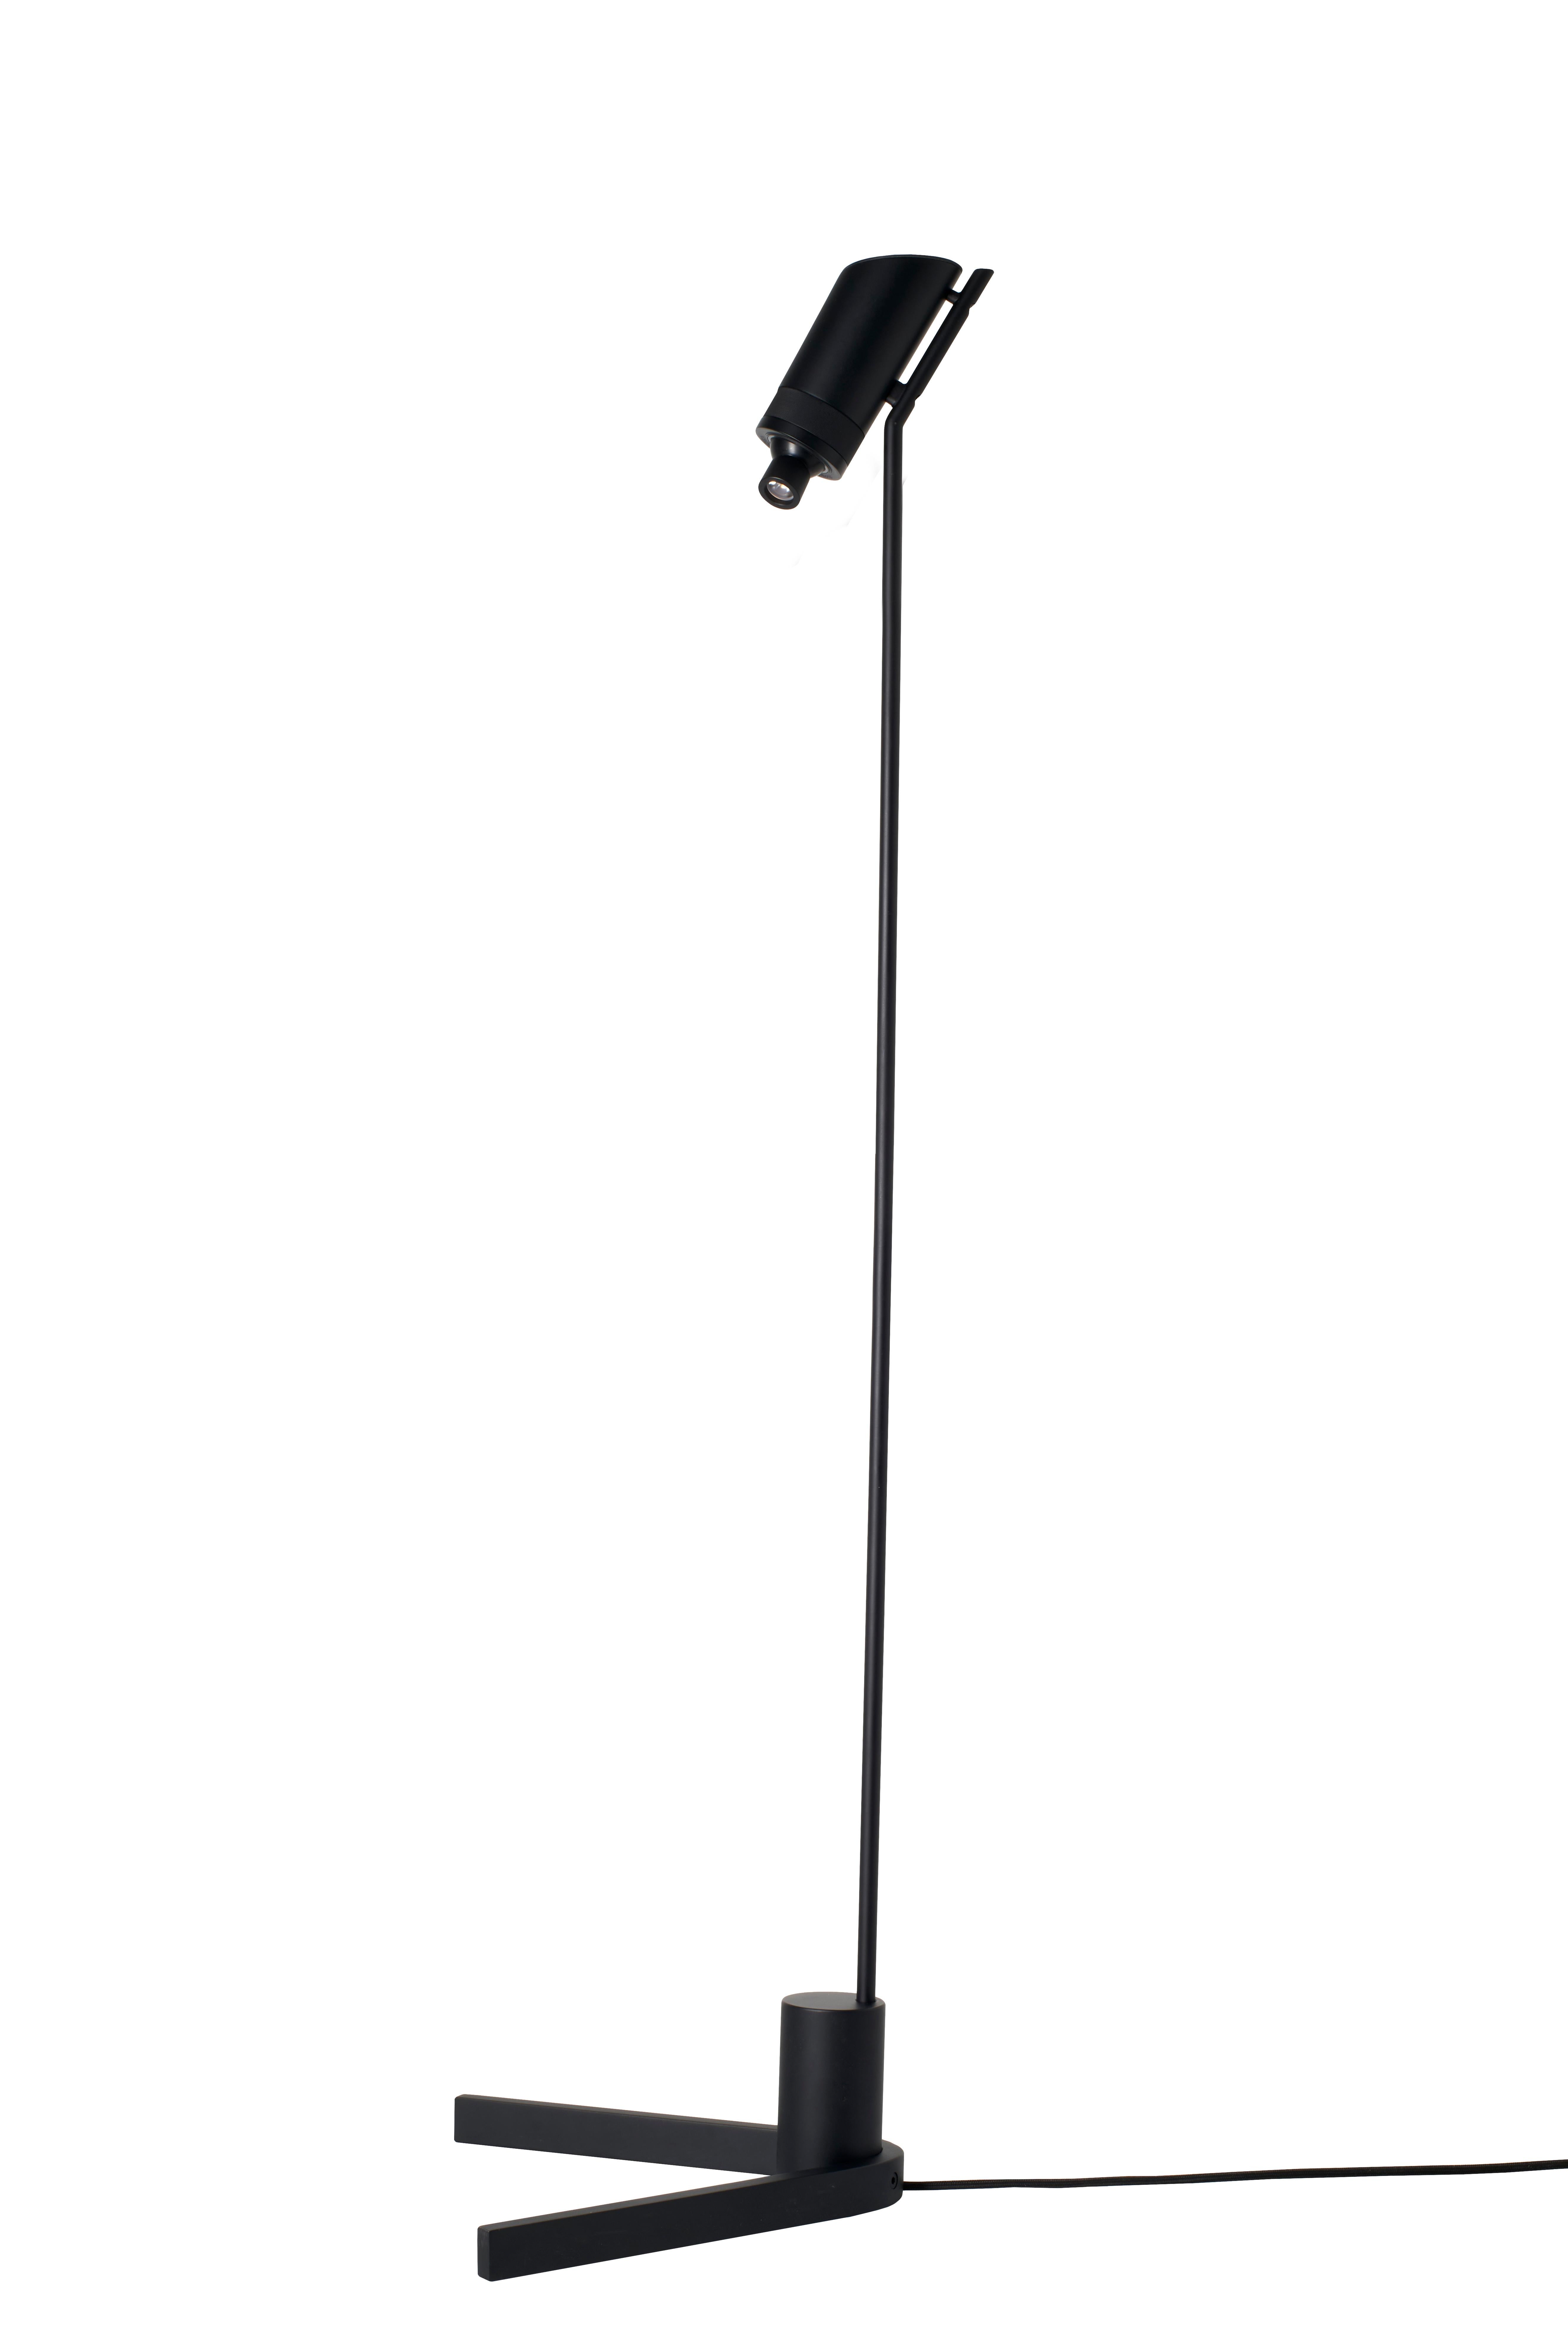 DCW Editions Vision 20/20 Floor Lamp in Black Aluminum and Steel
 
 Floor lamp / reading lamp. Vision Floor has been specifically conceived with a base made to fit under a sofa or a armchair.
 
 Additional information:
 Material: Aluminum, steel
